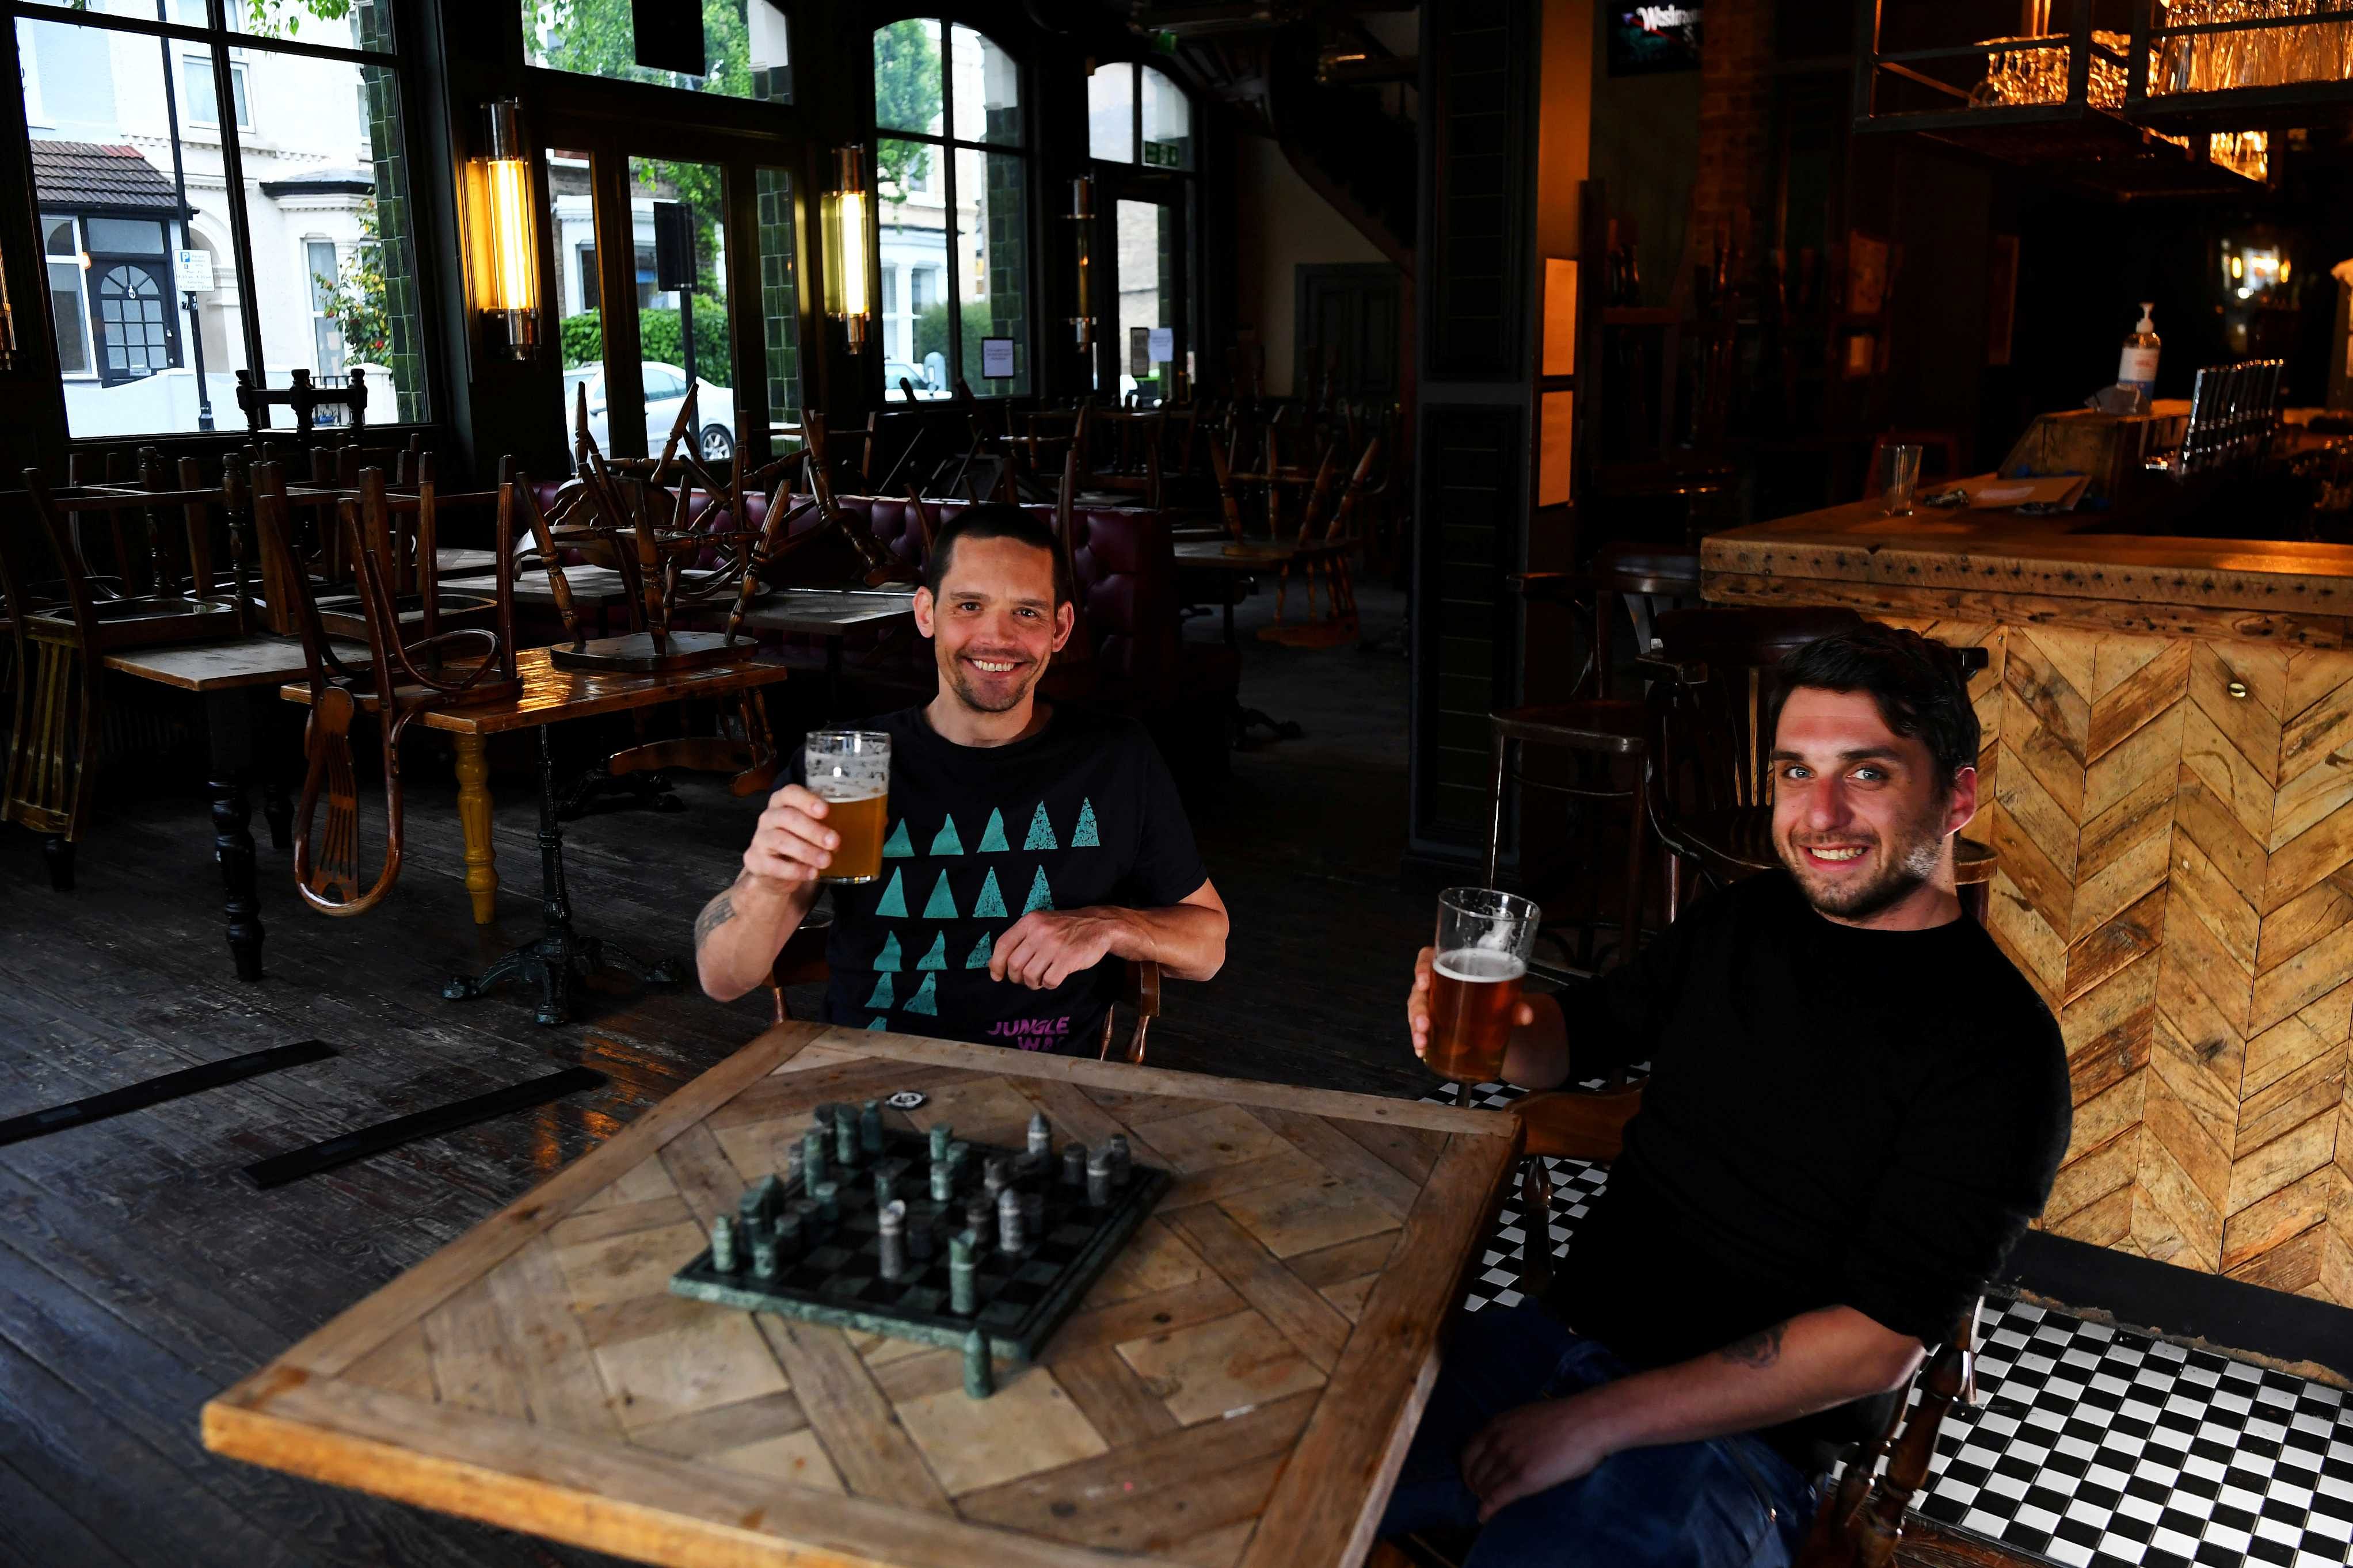 Steve Pond and Dominic Townsend enjoy a pint of beer and a game of chess at The Prince, a pub they share an apartment above and say are lucky enough to be stuck in during lockdown as the coronavirus disease (COVID-19) continues in London, Britain. (Reuters)